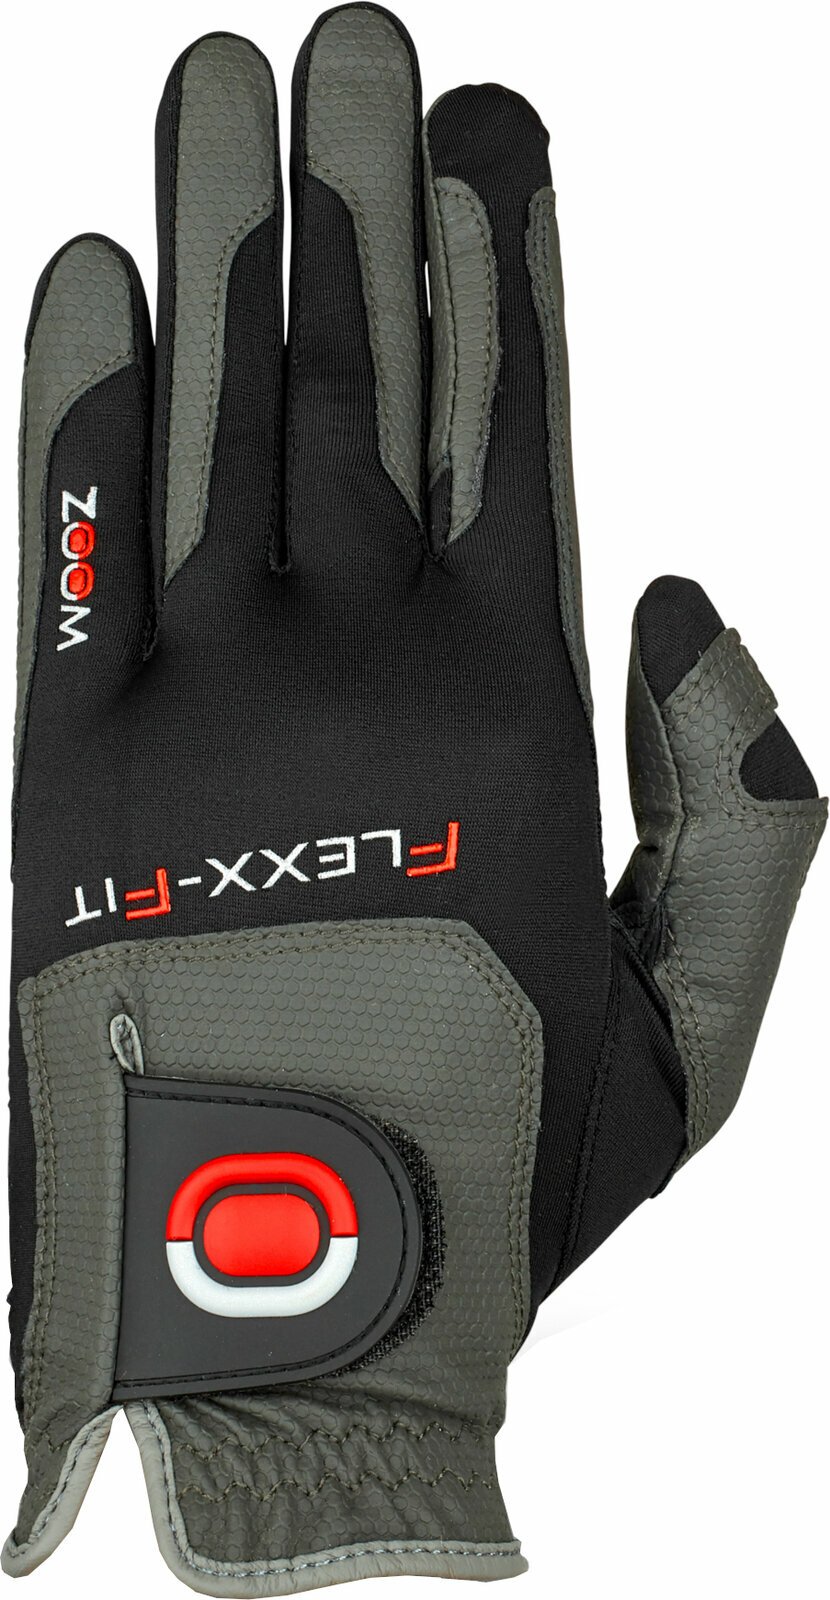 Rękawice Zoom Gloves Weather Womens Golf Glove Charcoal/Black/Red LH